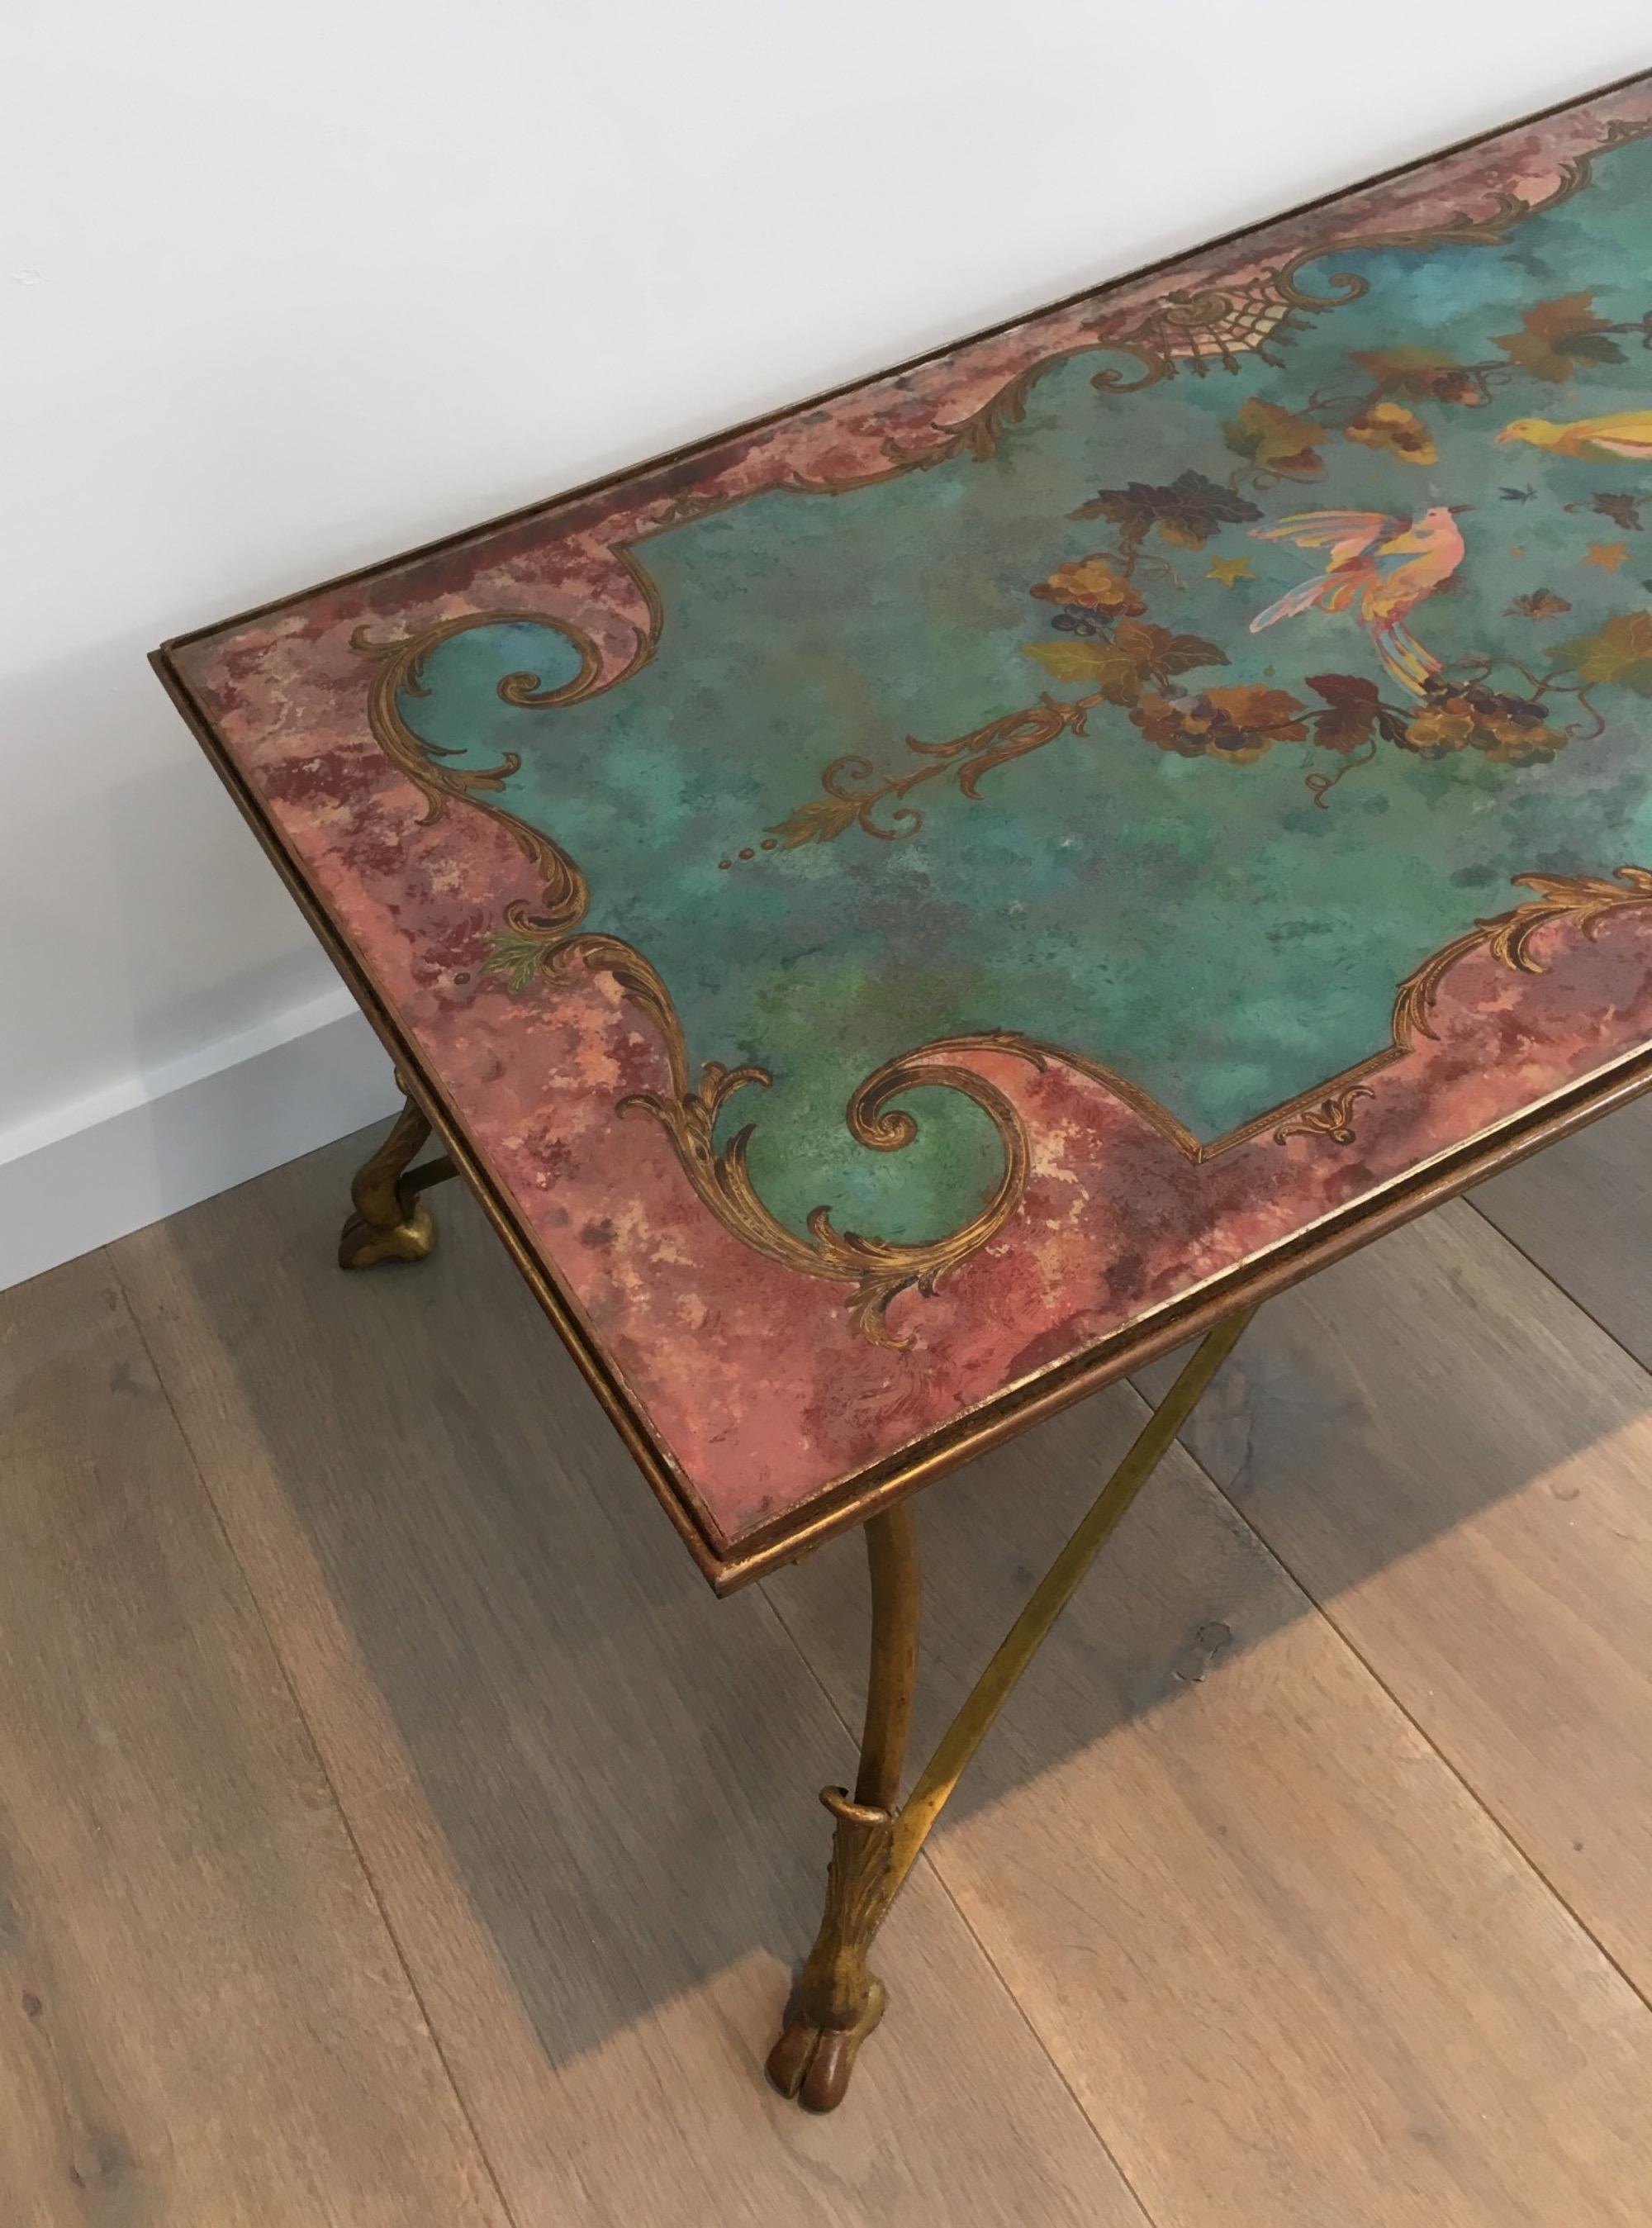 French Coffee Table with Beautiful Painting on Top Representing Birds and Flowers